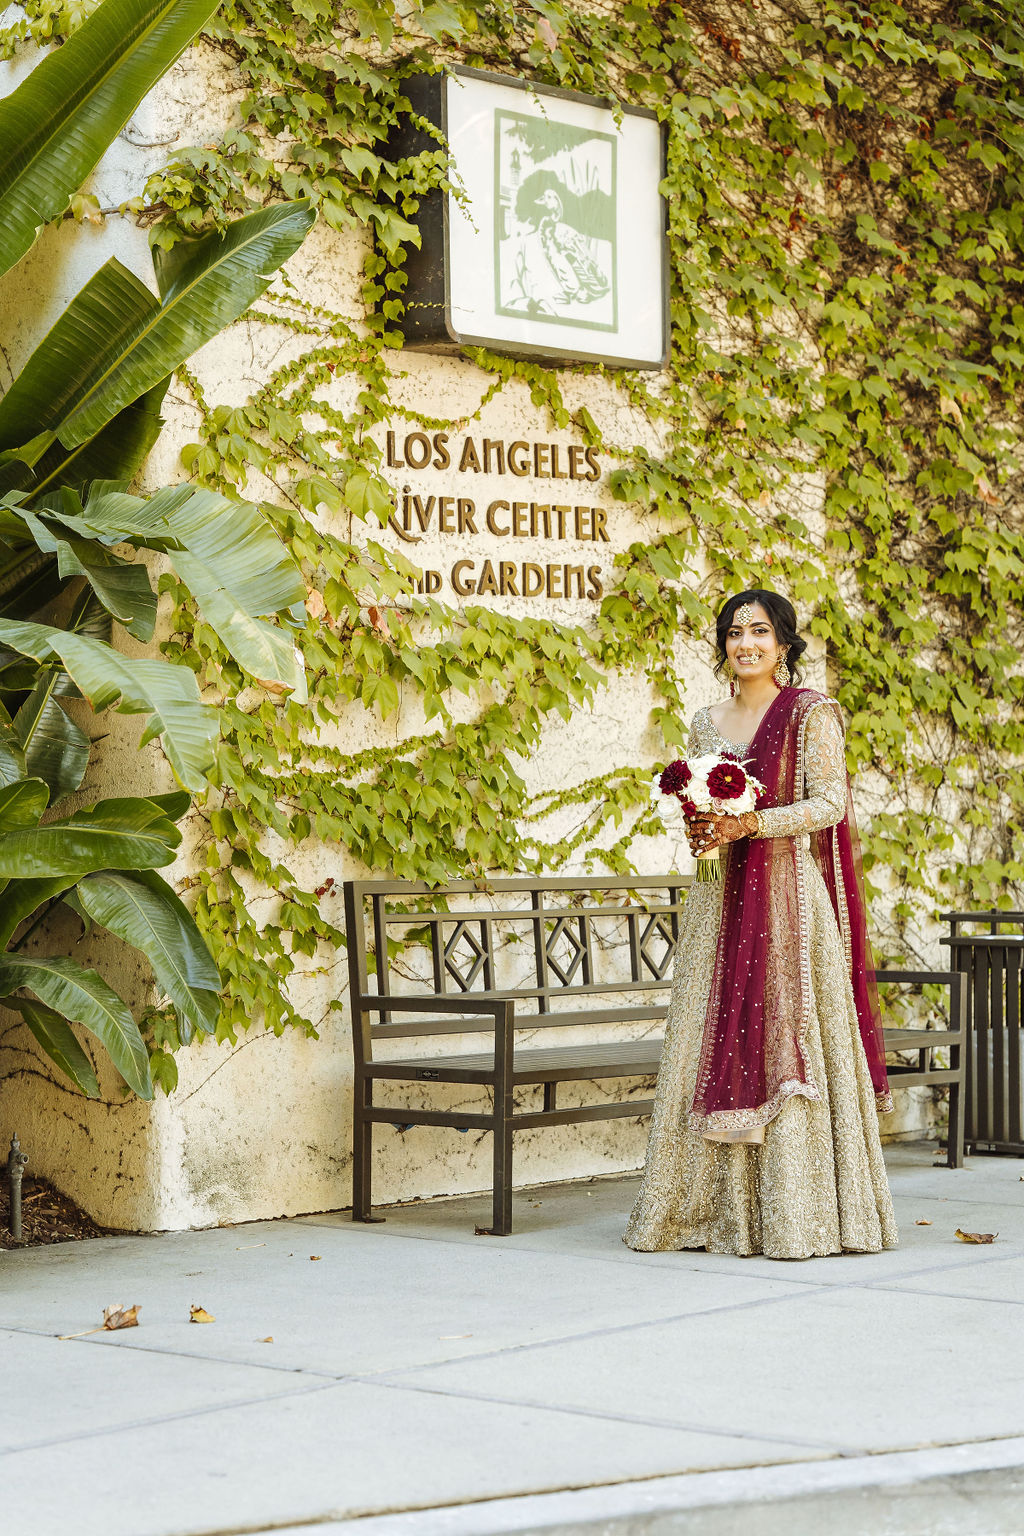 bride wearing embellished golden wedding saree holds bridal bouquet with white and maroon flowers